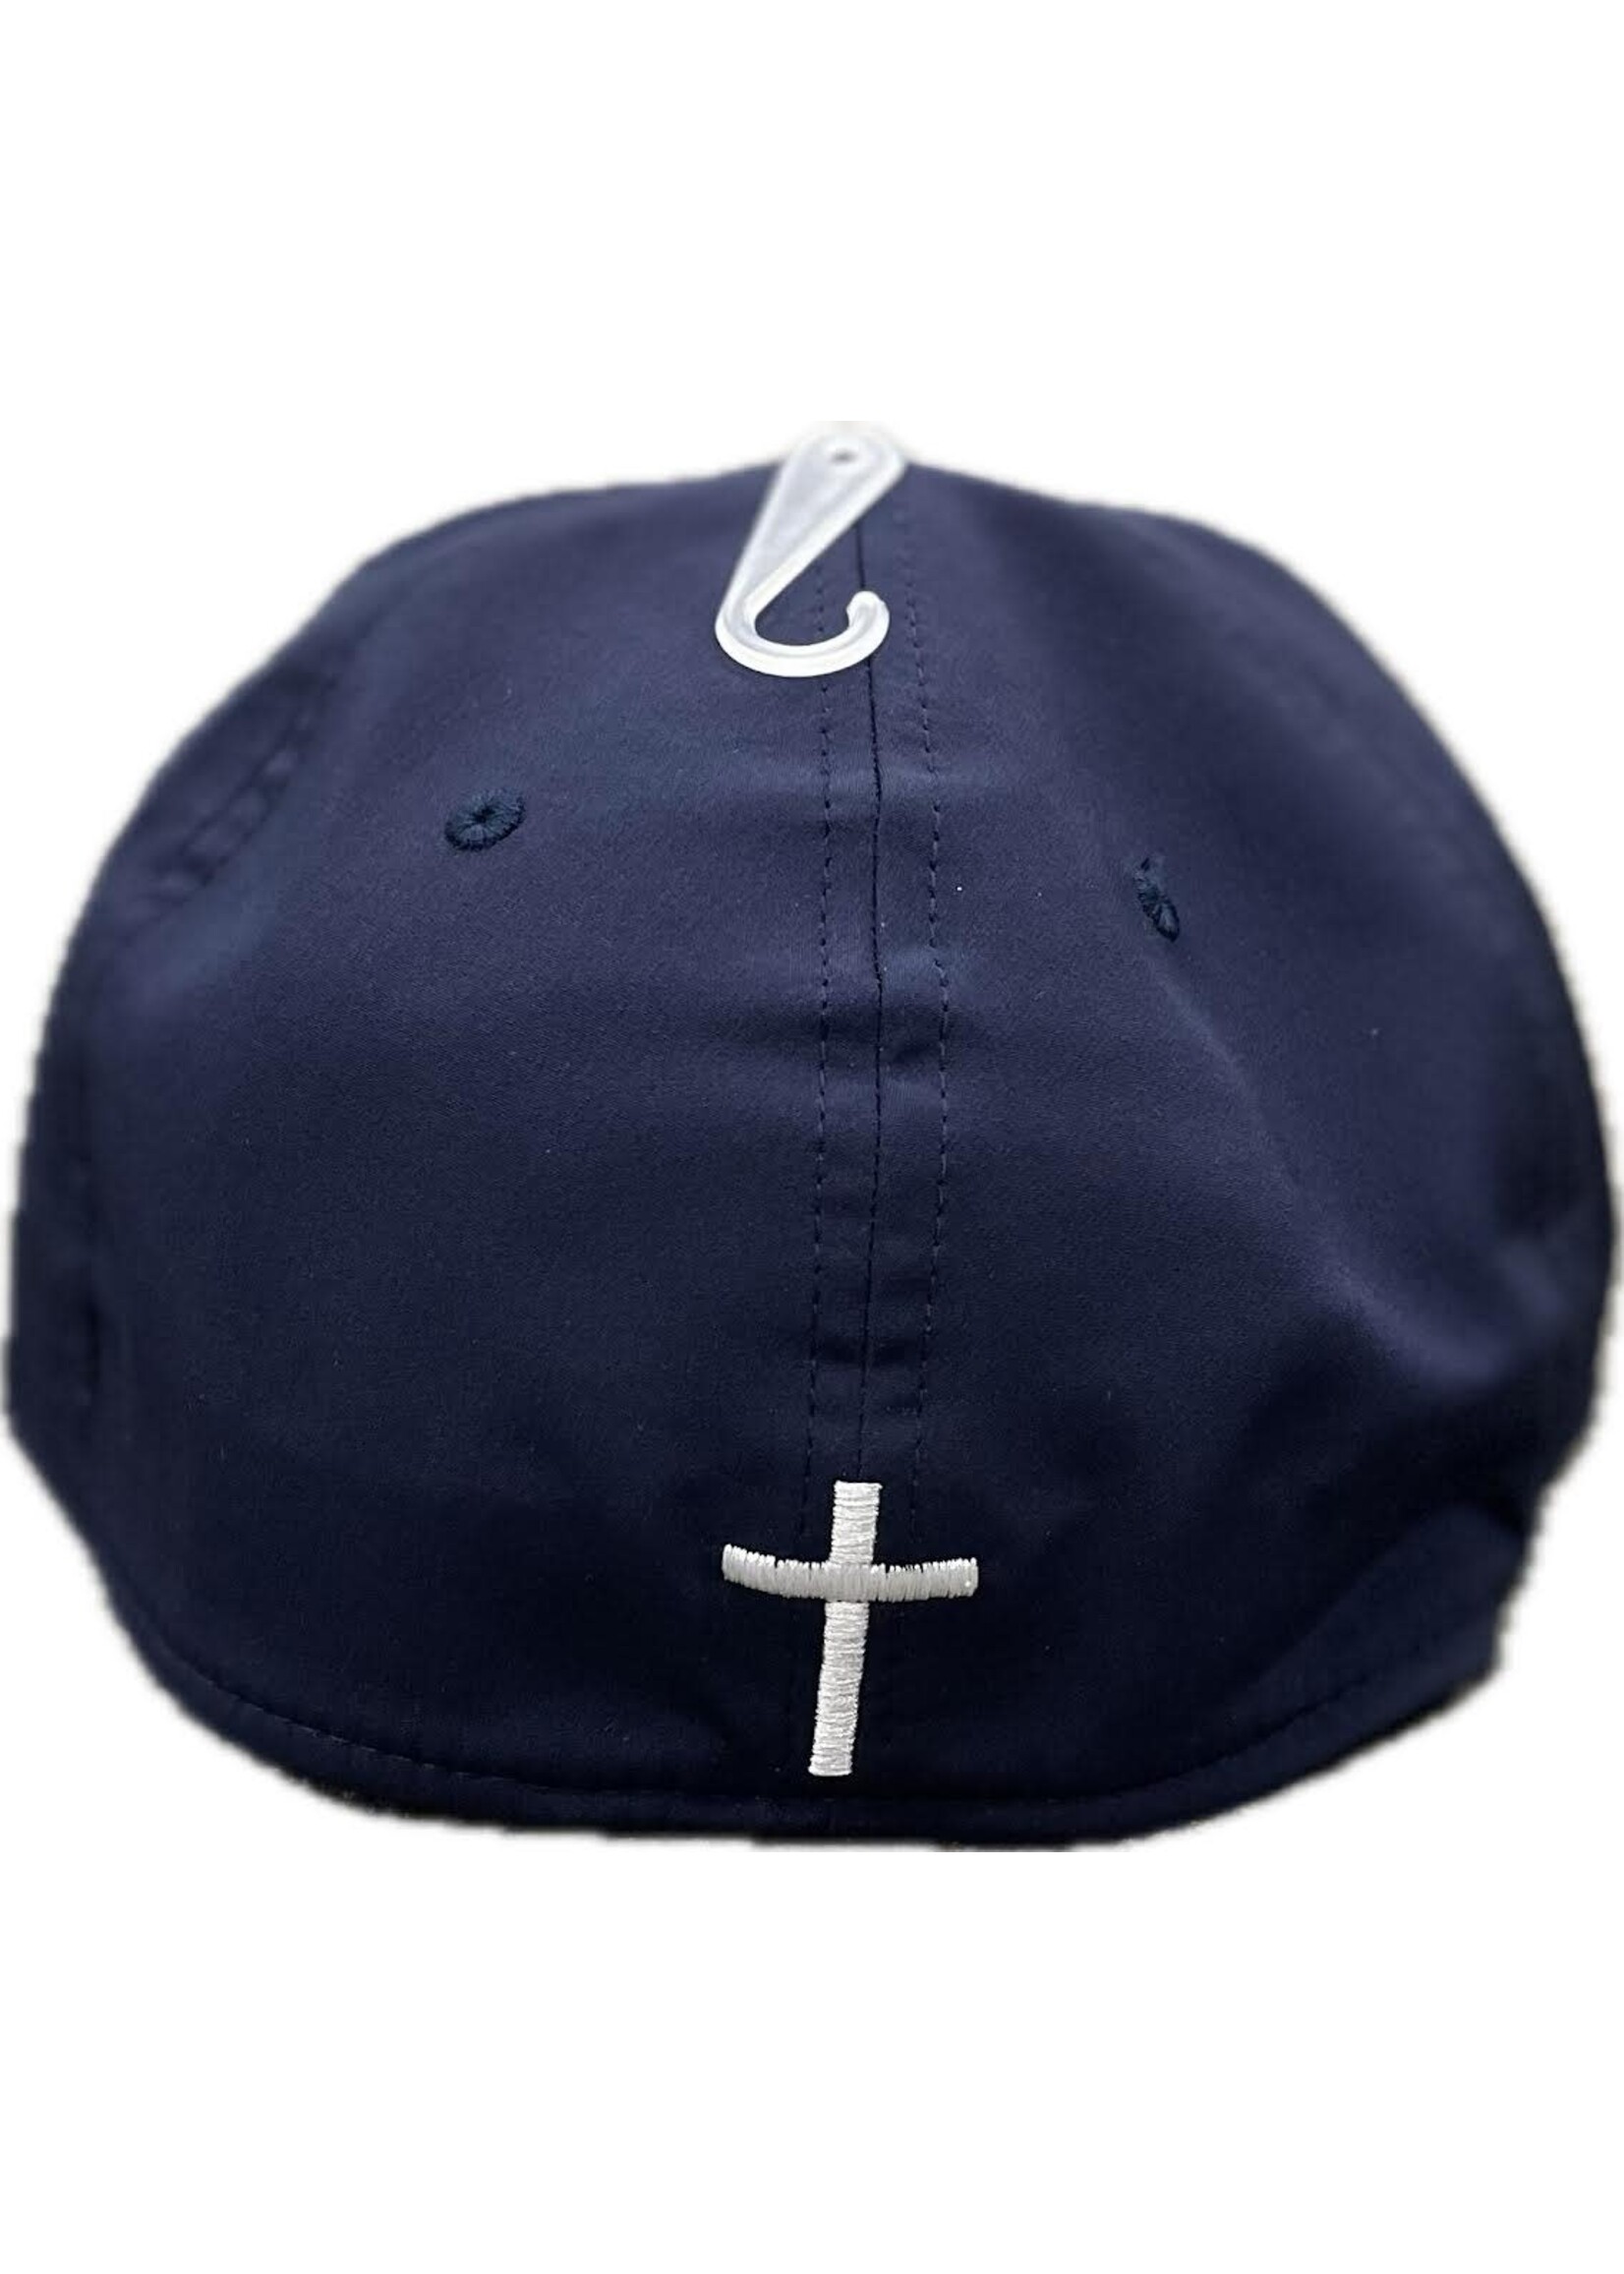 NON-UNIFORM Hat- Baseball Flat Brim Fitted Cap, Large Only,Navy/navy